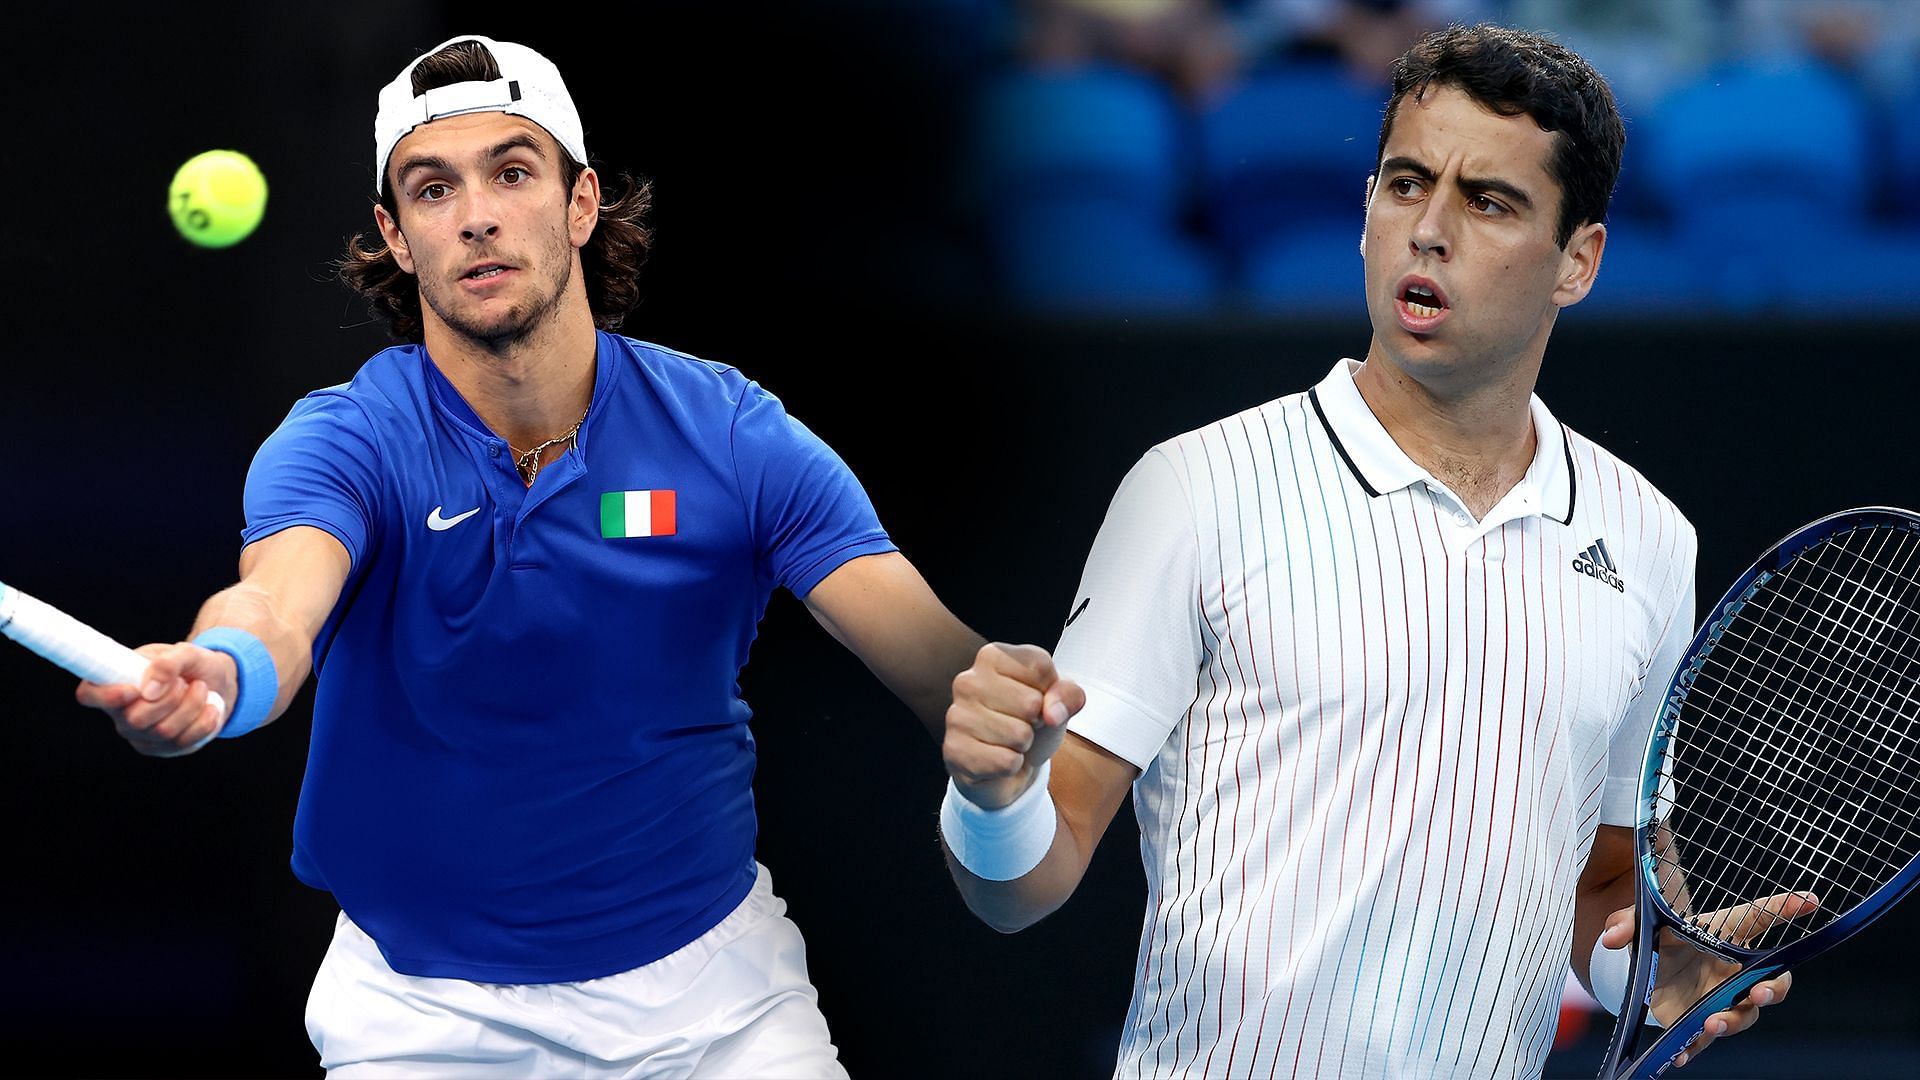 Chile Open 2023: Lorenzo Musetti vs Jaume Munar preview, head-to-head, prediction, odds and pick